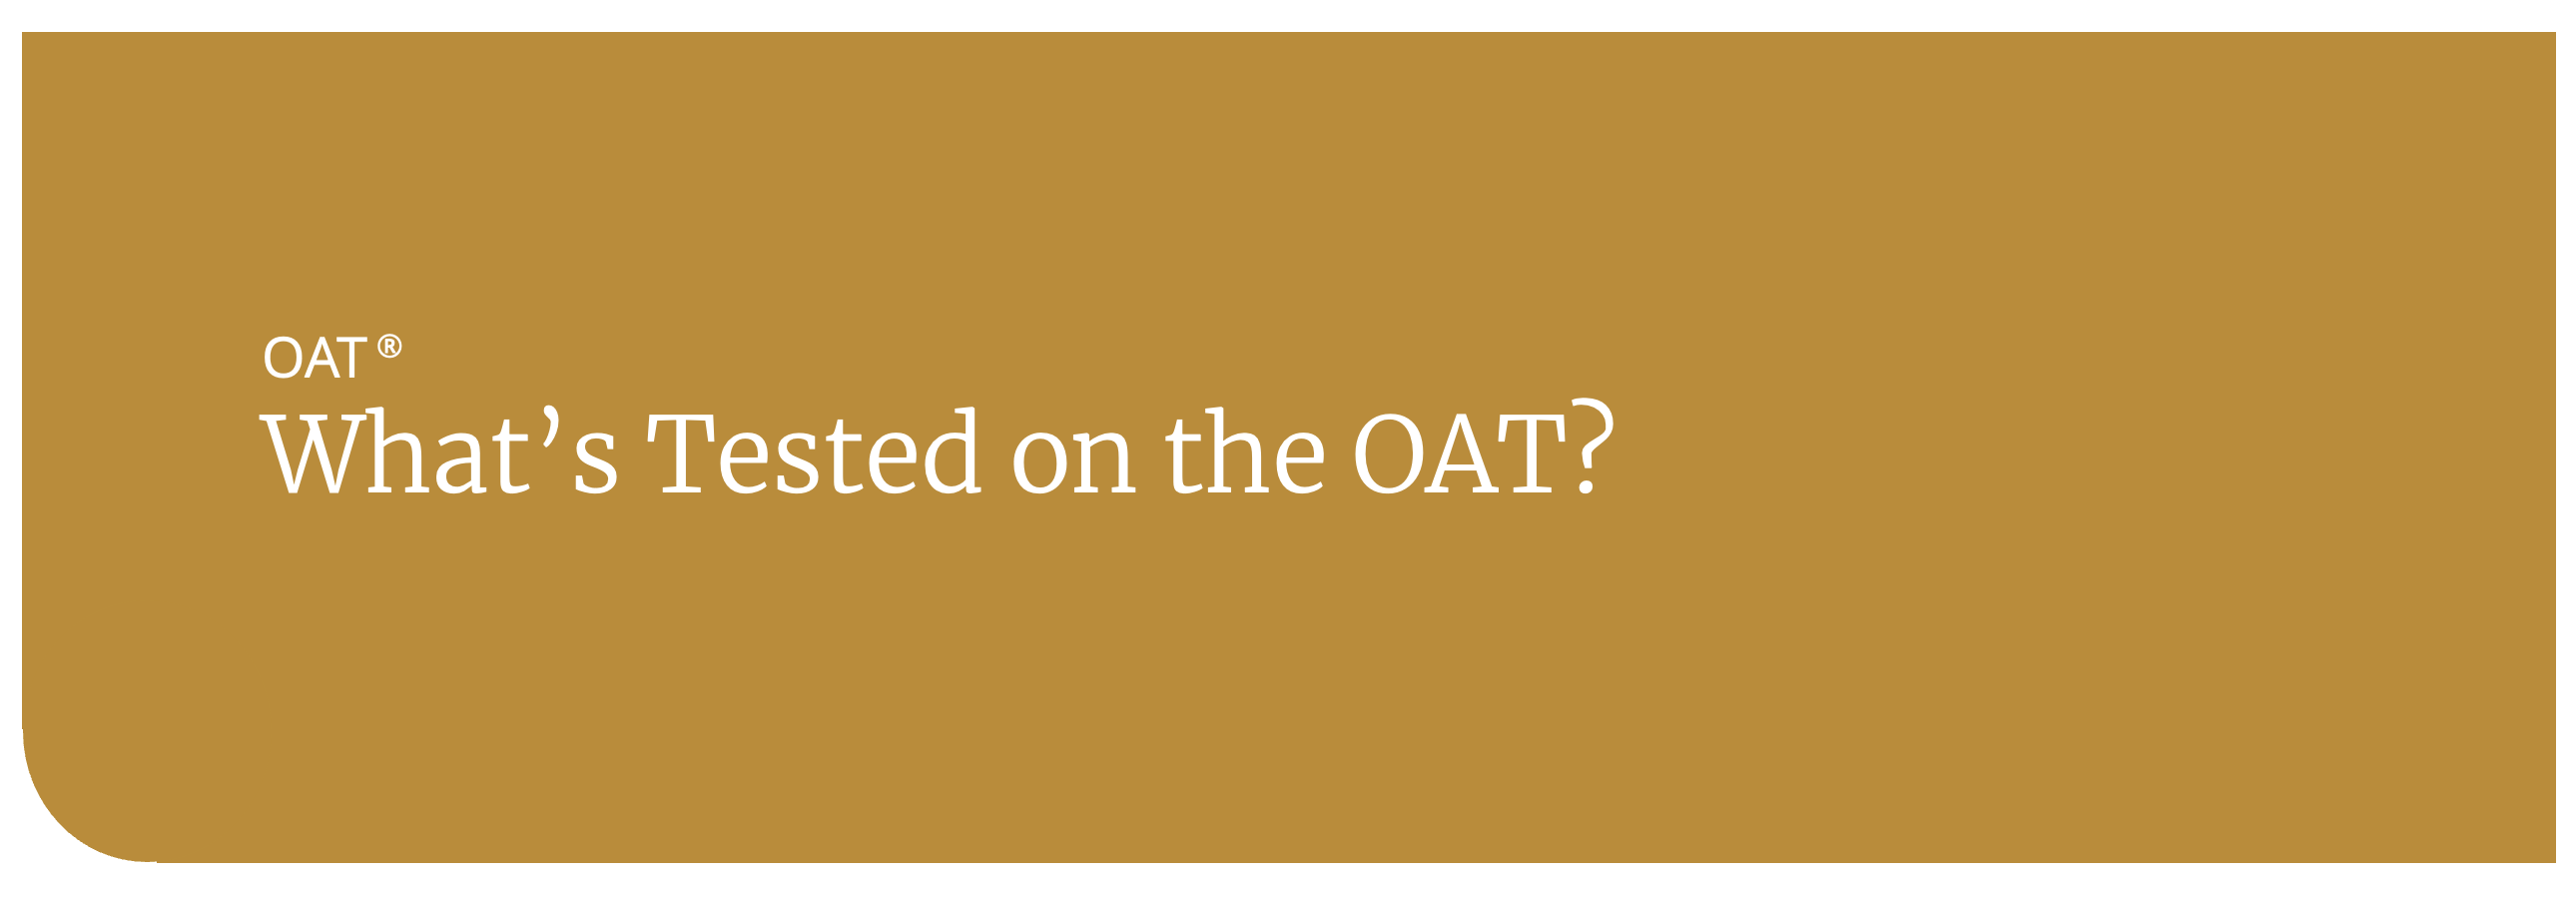 whats tested on the oat